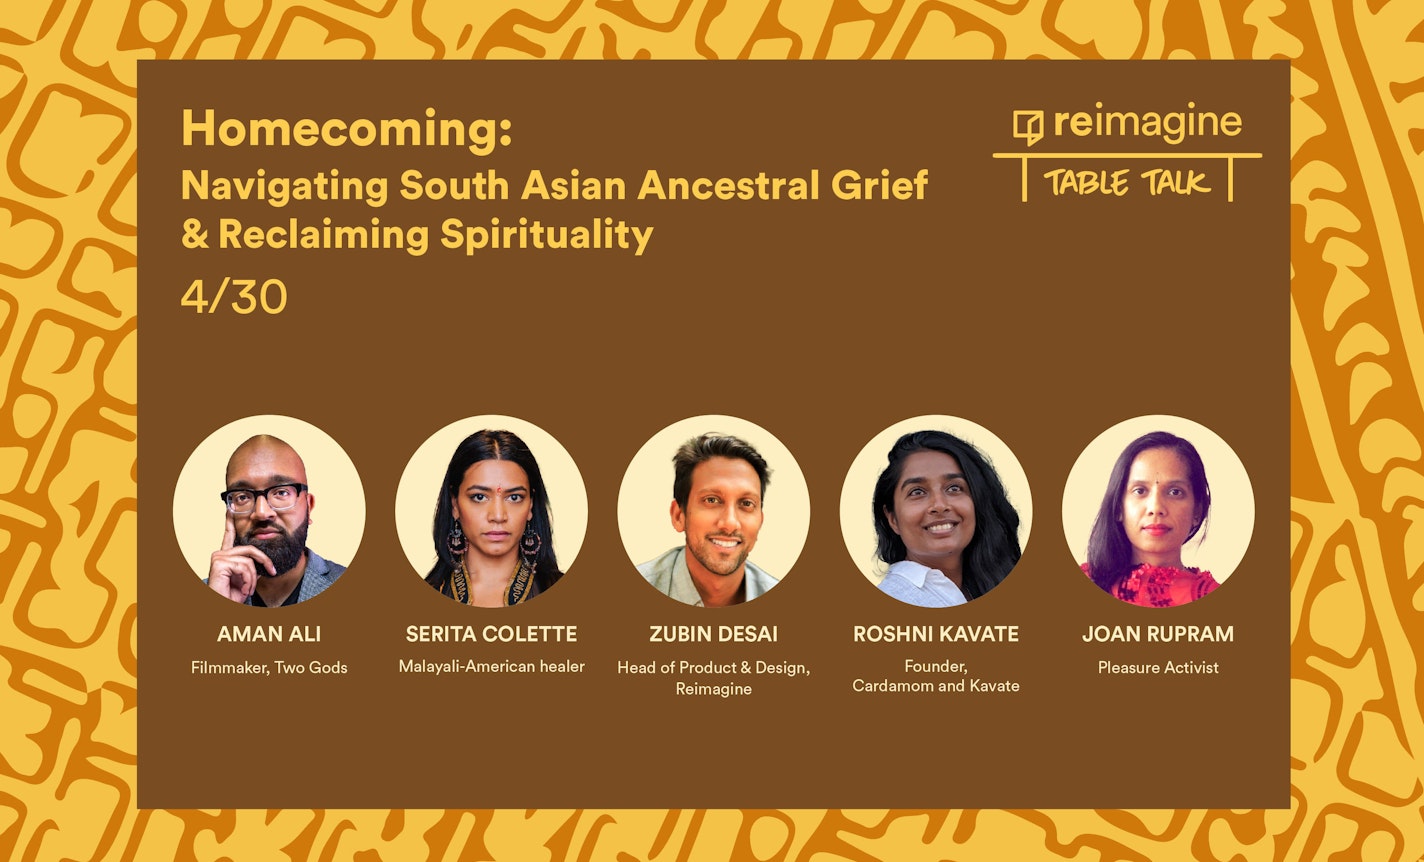 Homecoming: Navigating South Asian Ancestral Grief